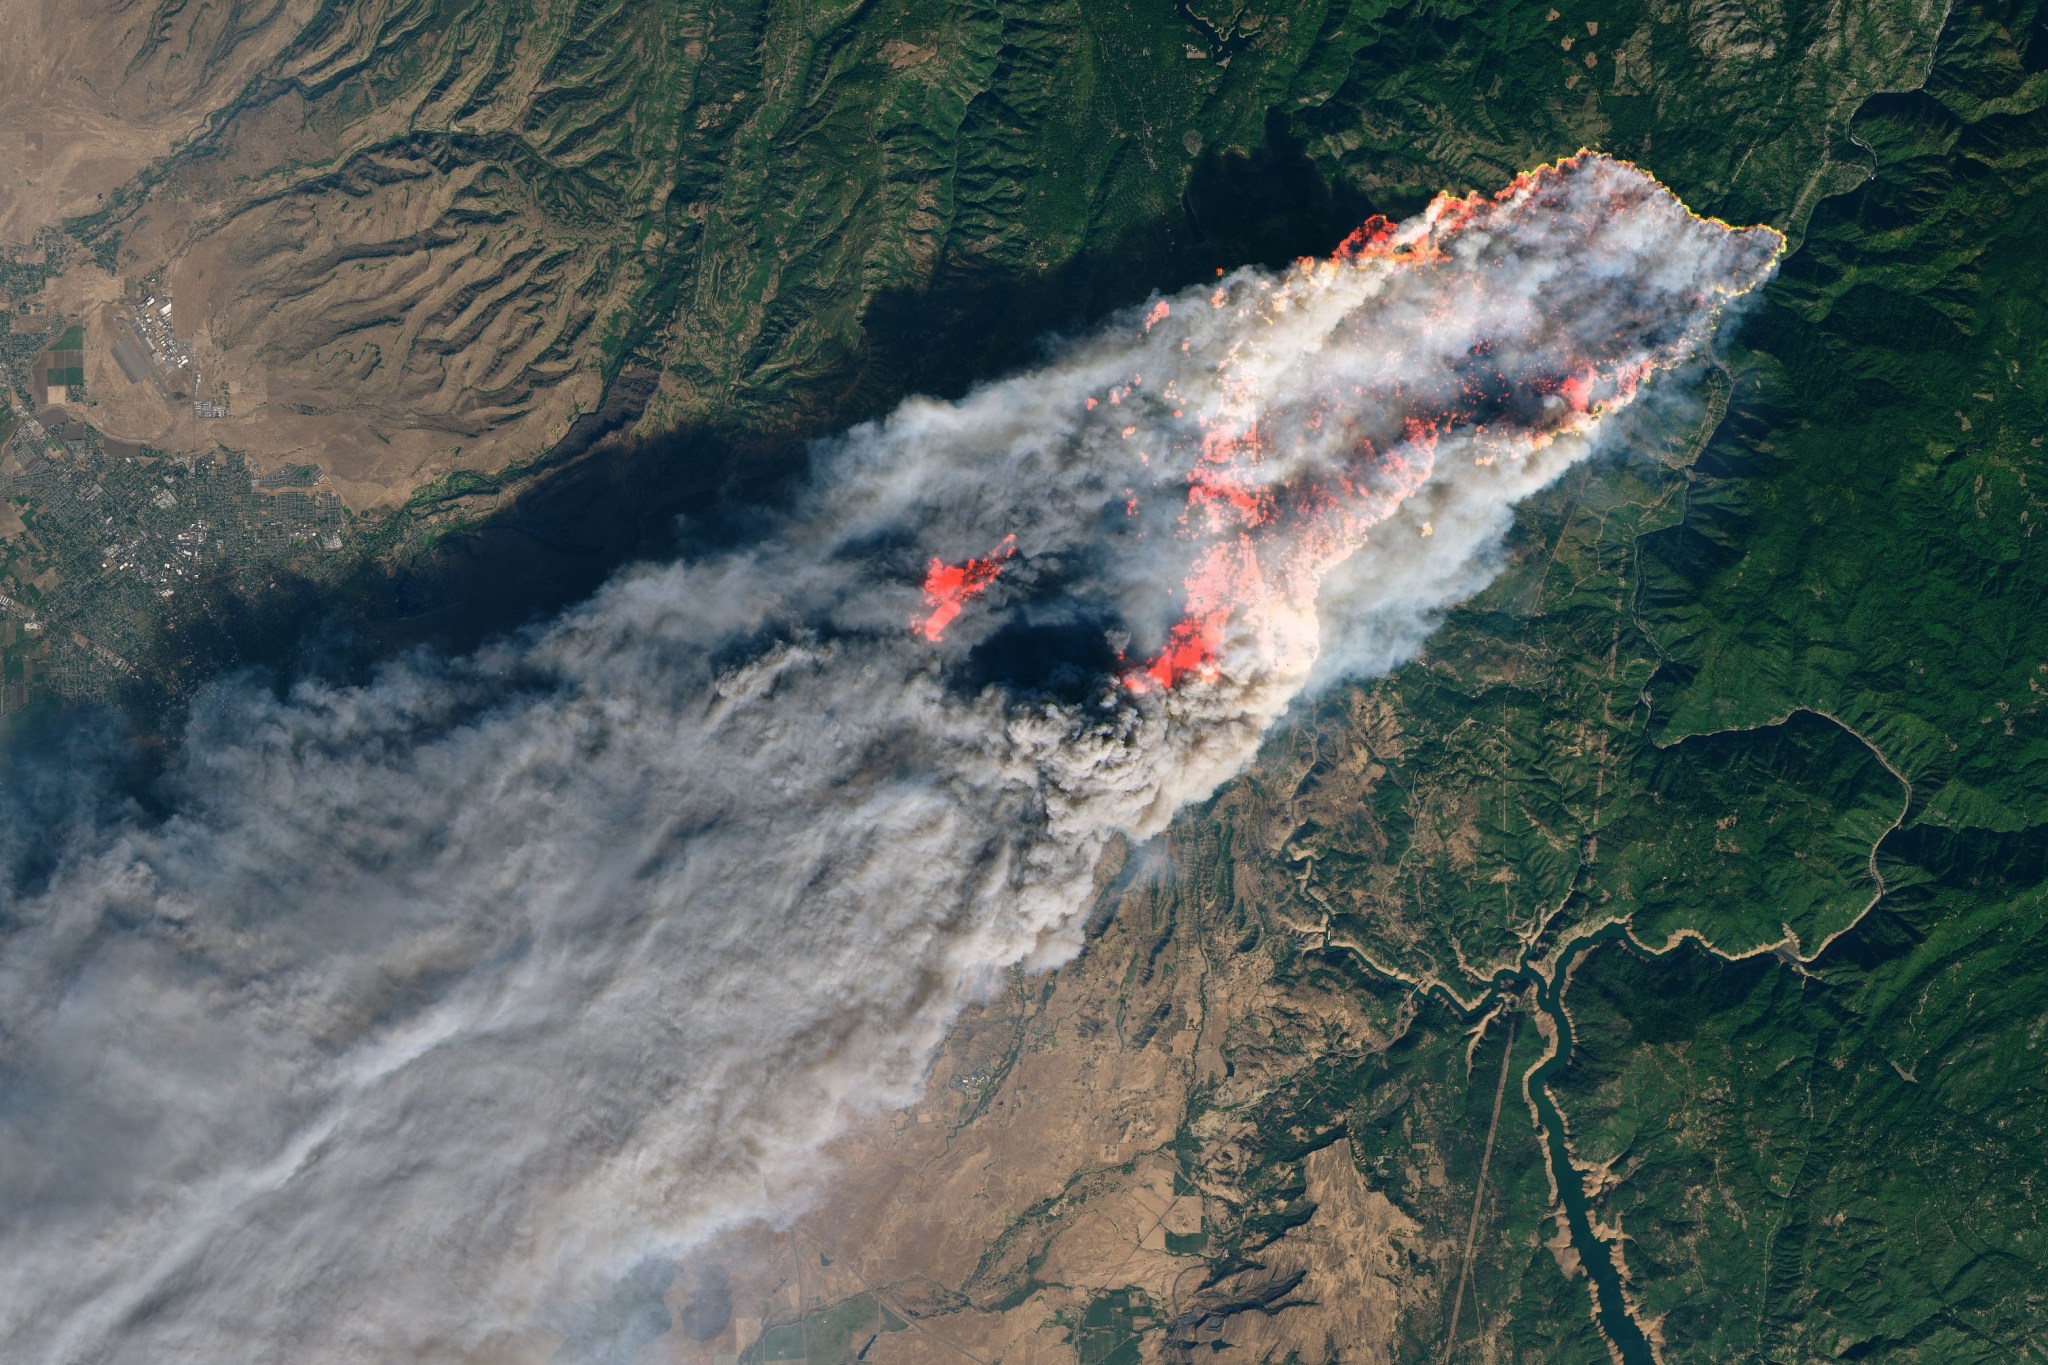 NASA Joins Group to Advance Wildfire Coordination, Capabilities